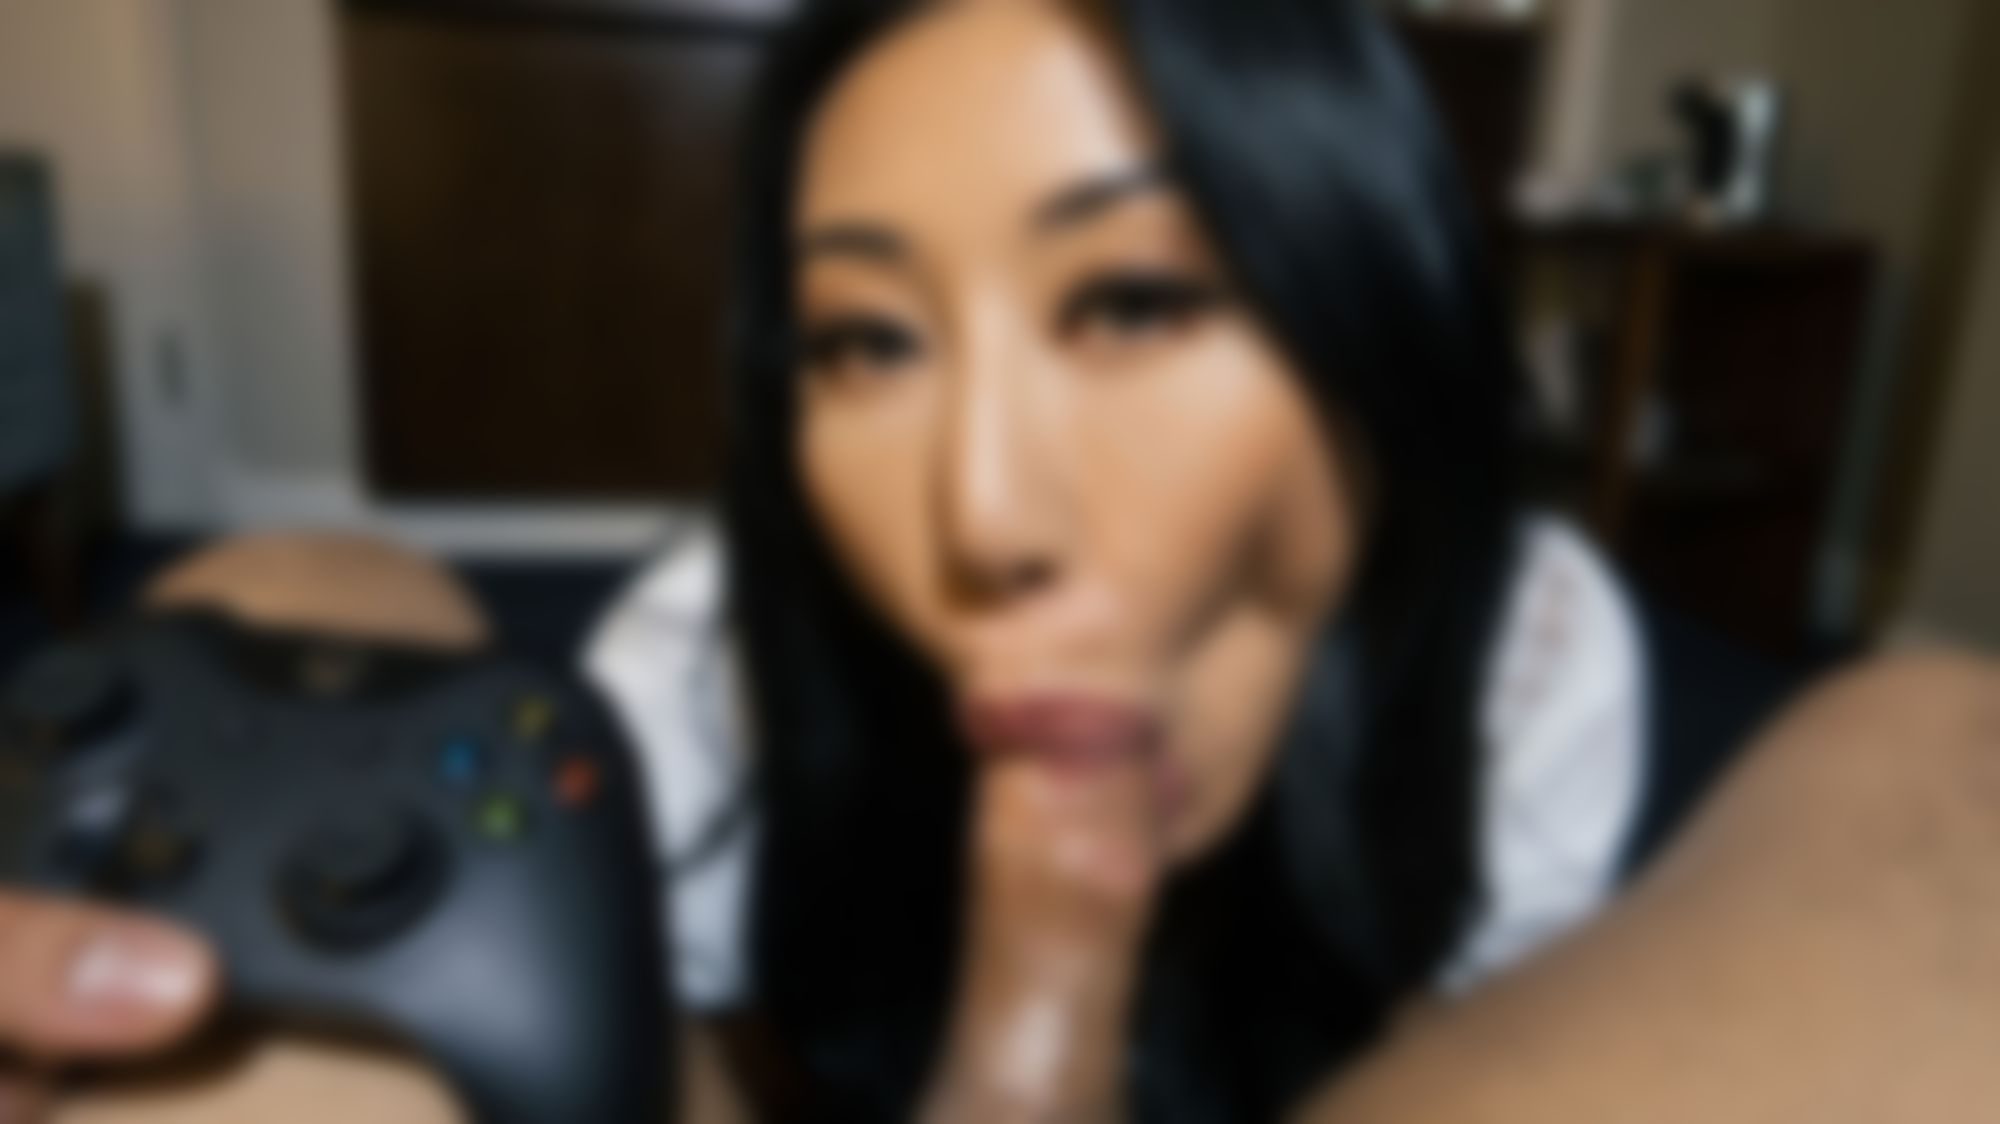 nicoledoshi : You're playing video games instead of paying attention to me and my horny Asian pussy? I'll start with giving you a nice blowjob to really get your attention and your cock throbbing. Then when you're hard and ready for more, I am going to ride that cock of yours and let you super smash my wet pussy. I promised to let you fuck me in the ass if you stopped playing games and paid attention to me, right? Stick in your hard cock right into my tight butt hole and make this game night into an anal night. Finish it off with fucking me doggystyle and cumming in my mouth for your final fantasy.